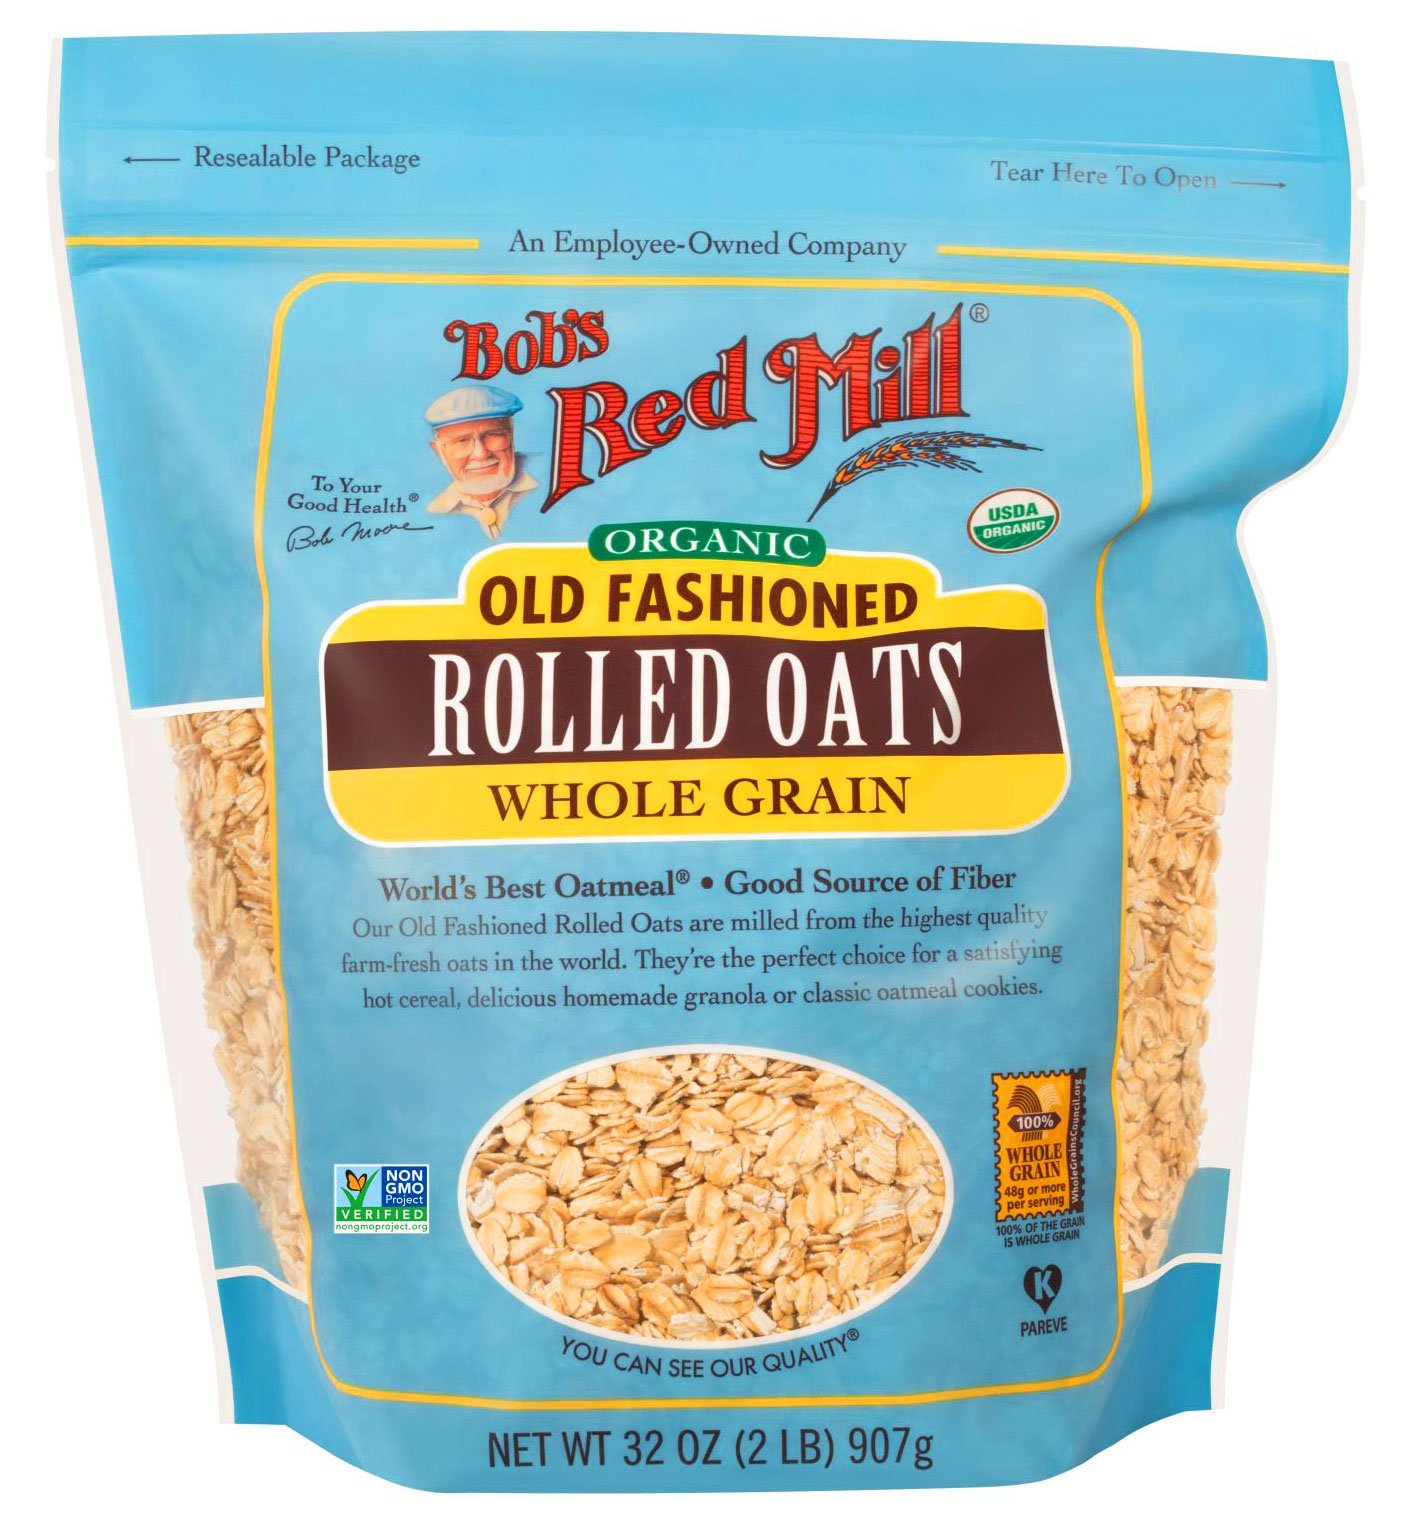 Bob's Red Mill Organic Old Fashioned Whole Grain Rolled Oats - Shop at ...